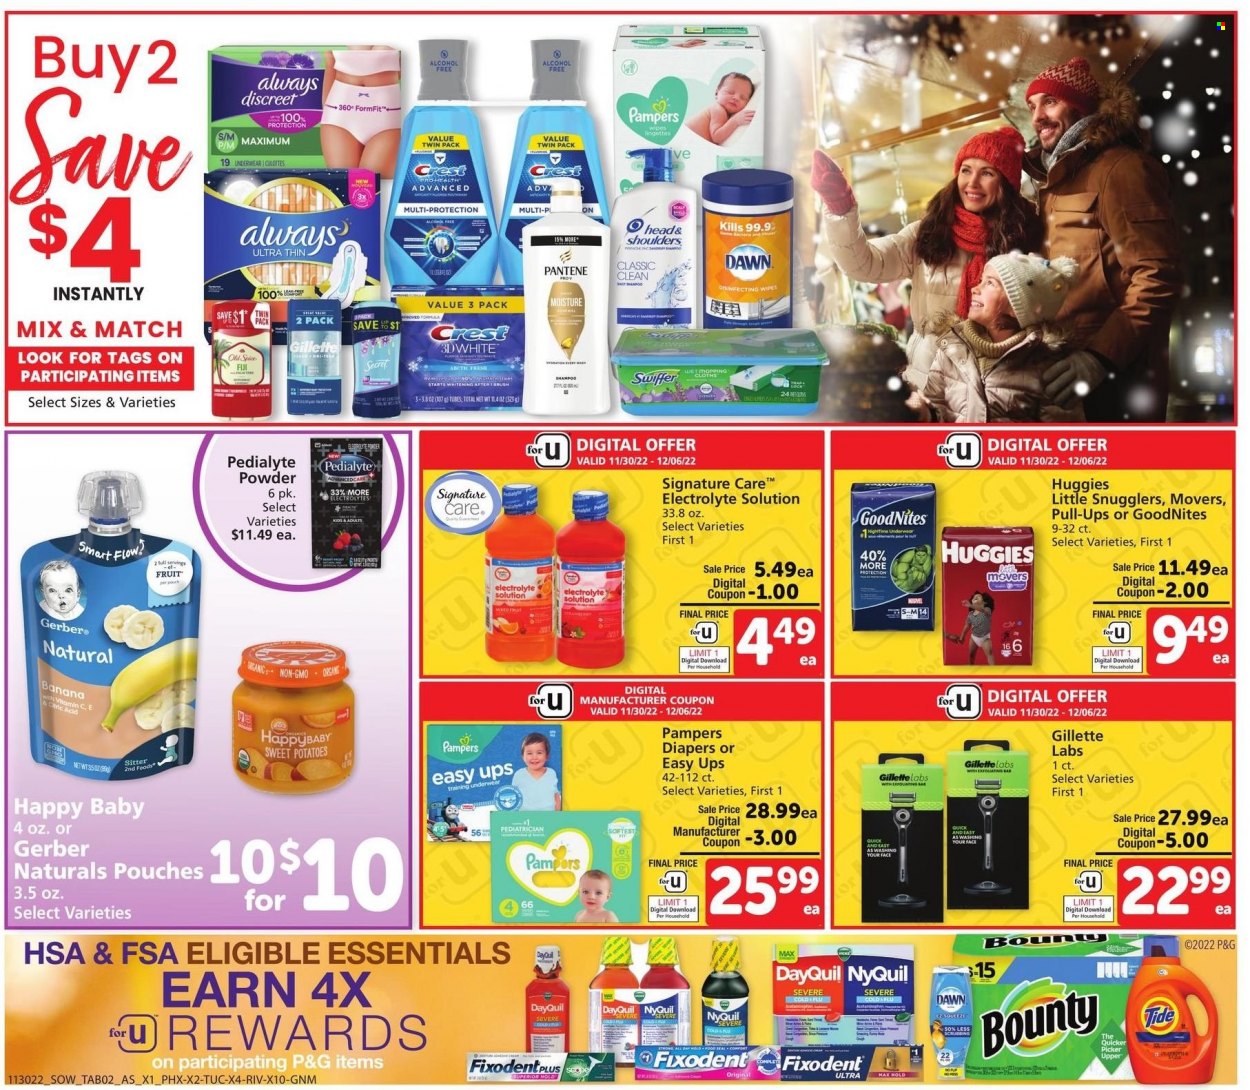 thumbnail - Safeway Flyer - 11/30/2022 - 12/06/2022 - Sales products - sweet potato, potatoes, Bounty, Gerber, spice, wipes, Swiffer, Tide, shampoo, Old Spice, Fixodent, Crest, Always Discreet, Head & Shoulders, Pantene, Gillette, brush, DayQuil, Cold & Flu, NyQuil, Huggies. Page 6.